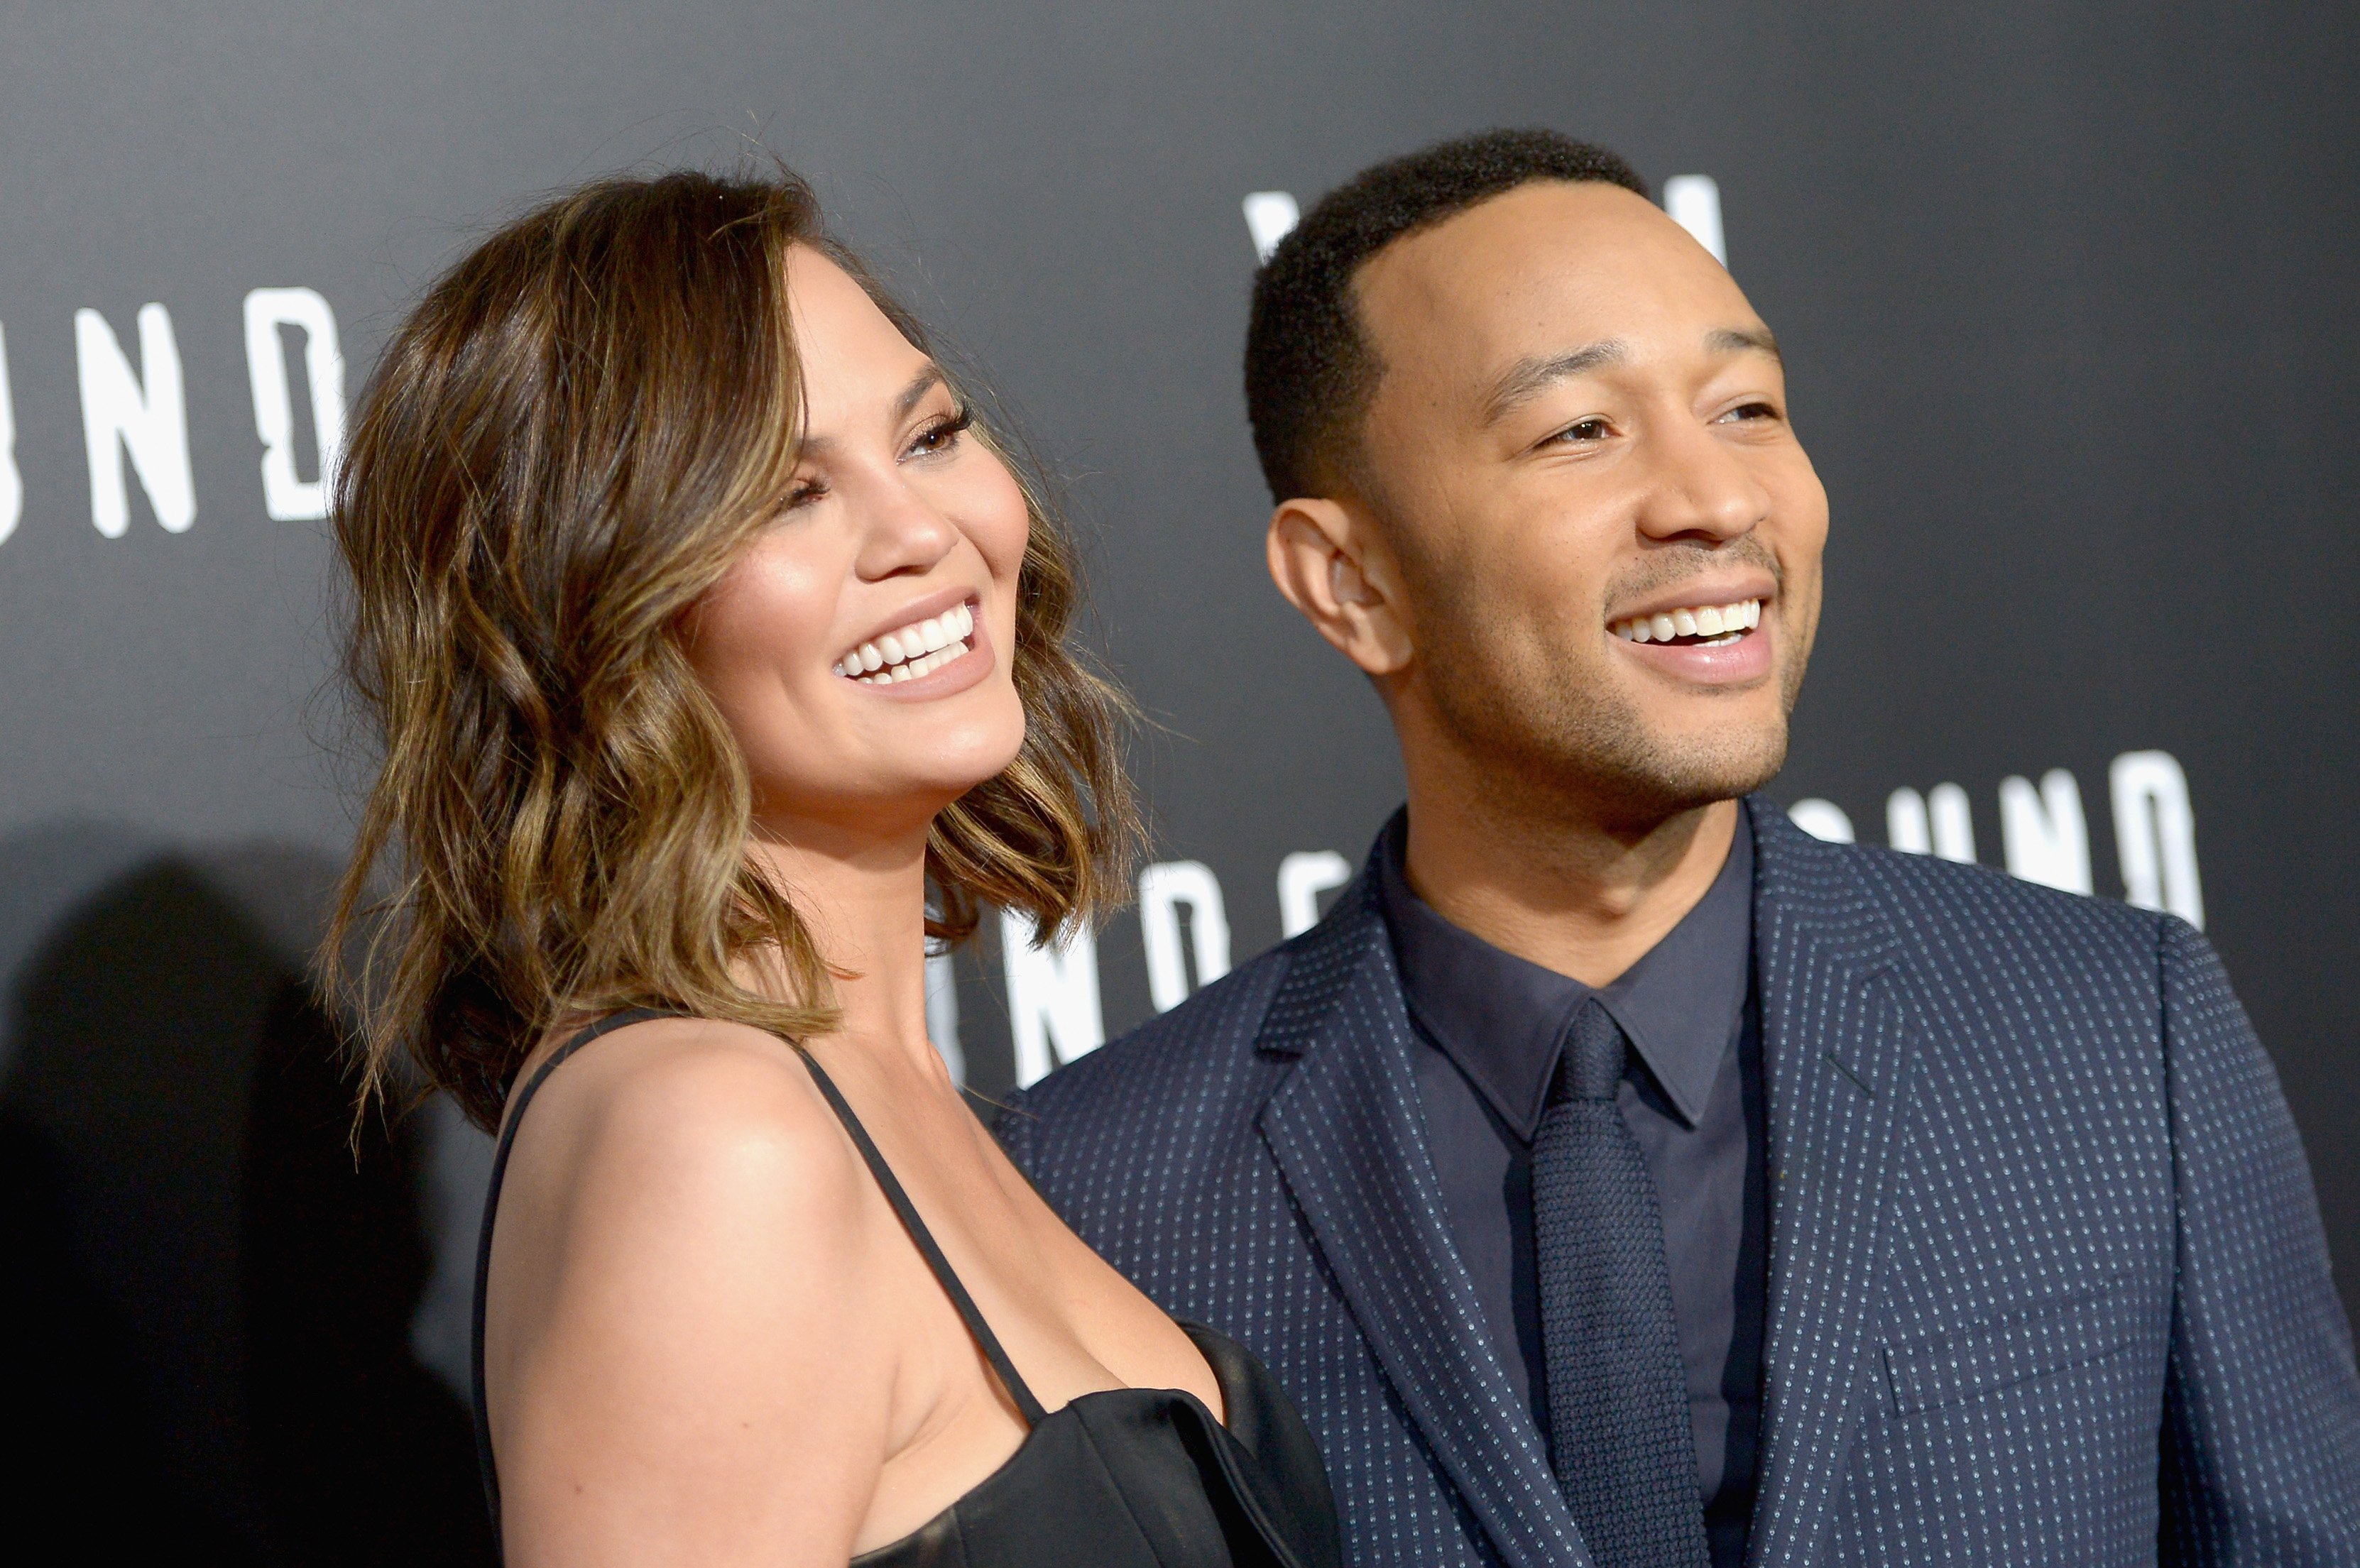 Chrissy Teigen and John Legend attending WGN America's "Underground" Season Two Premiere Screening at Regency Village Theatre on March 1, 2017 in California. | Photo by Charley Gallay/Getty Images